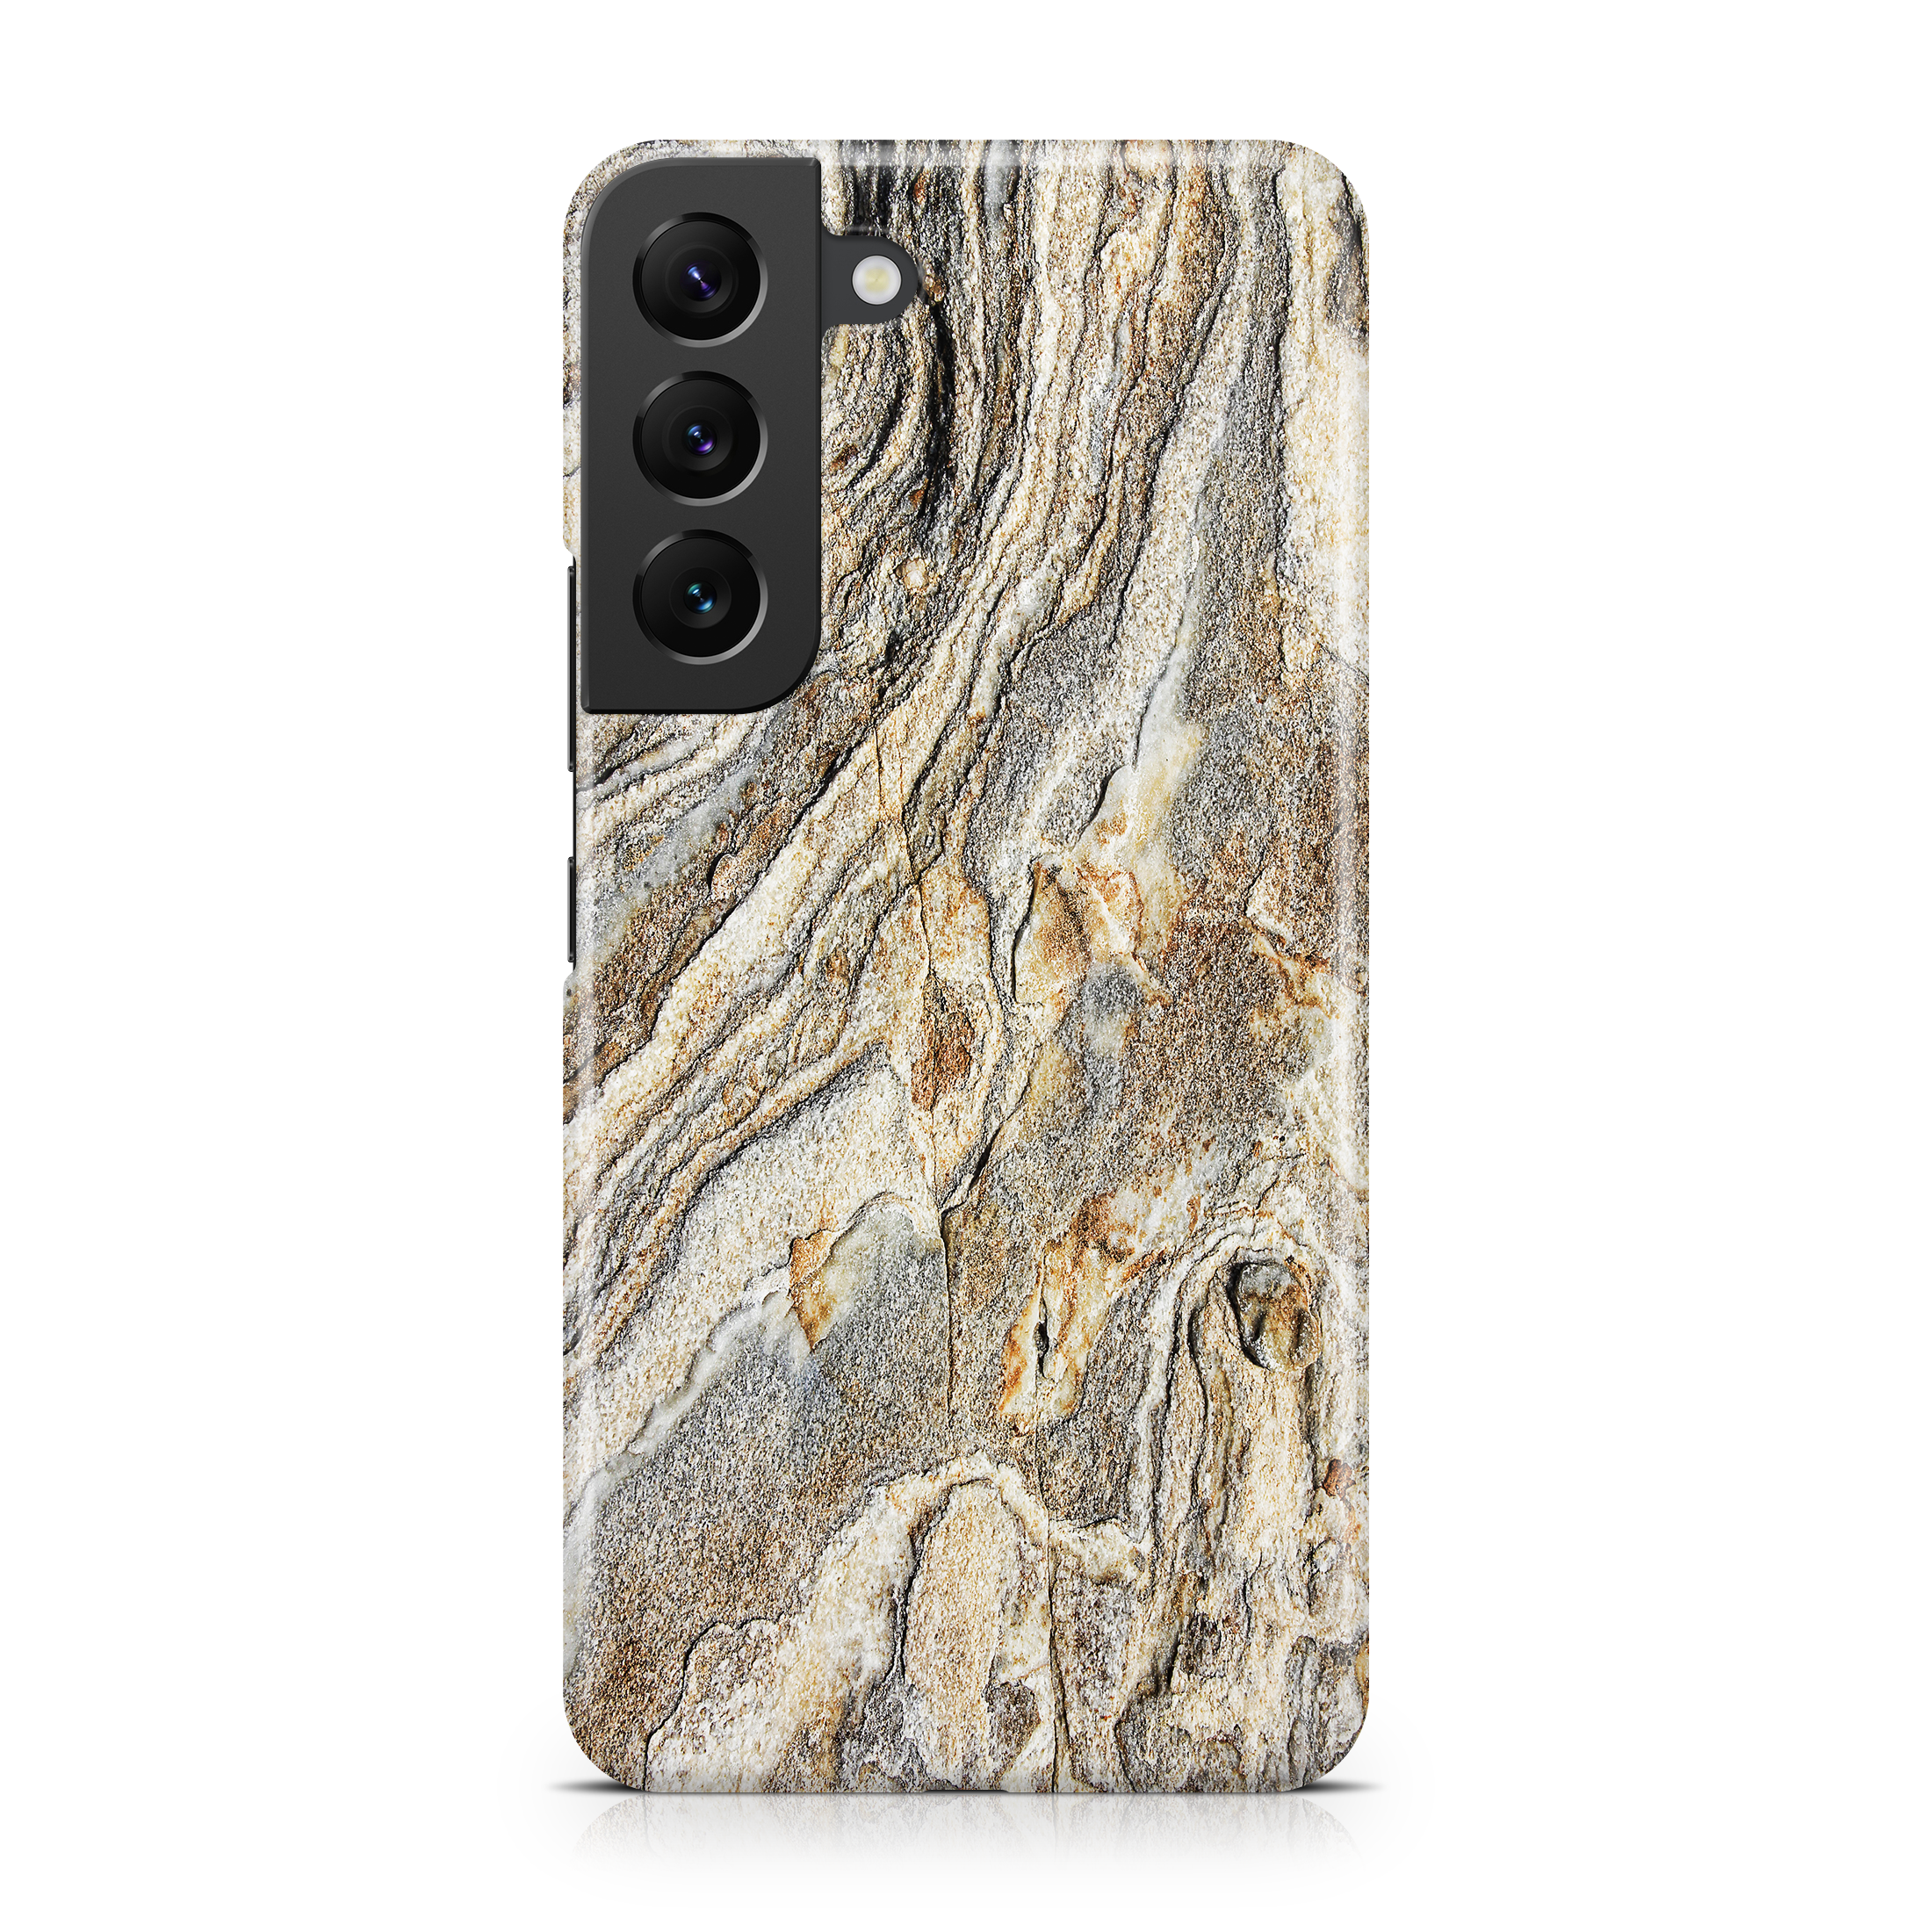 Rough Stone - Samsung phone case designs by CaseSwagger